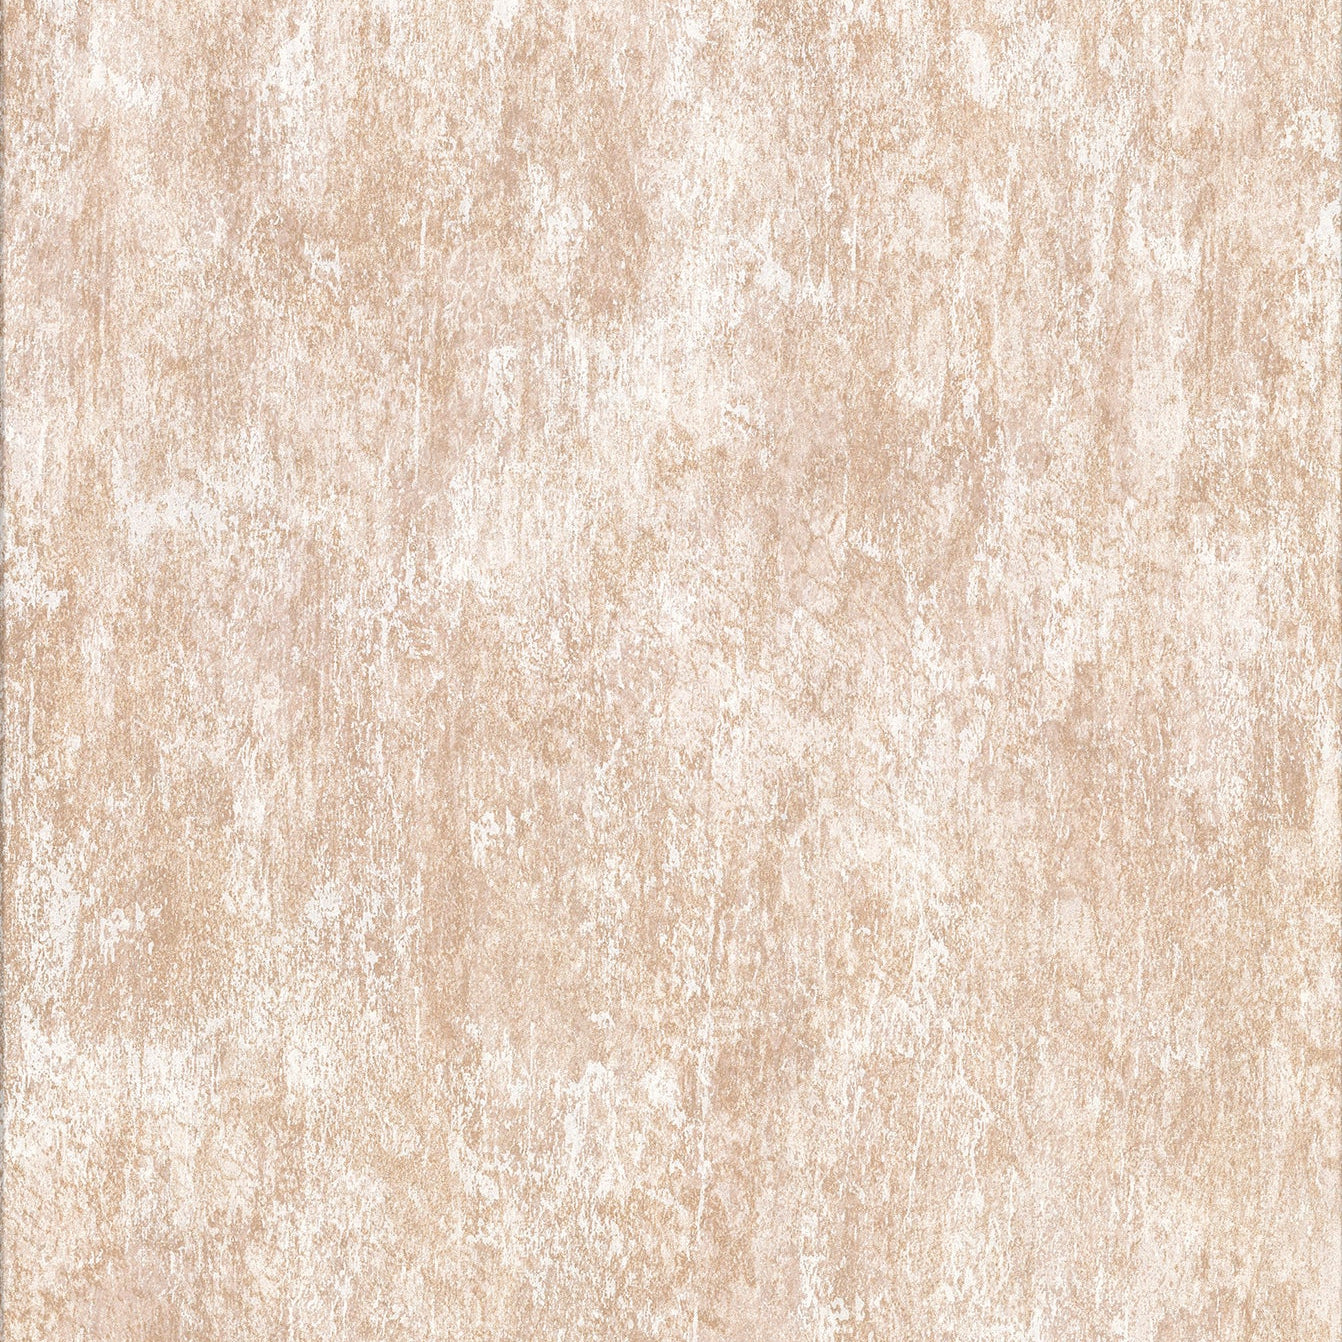 View 2909-SH-12055 Riva Bovary Copper Distressed Texture Brewster Wallpaper